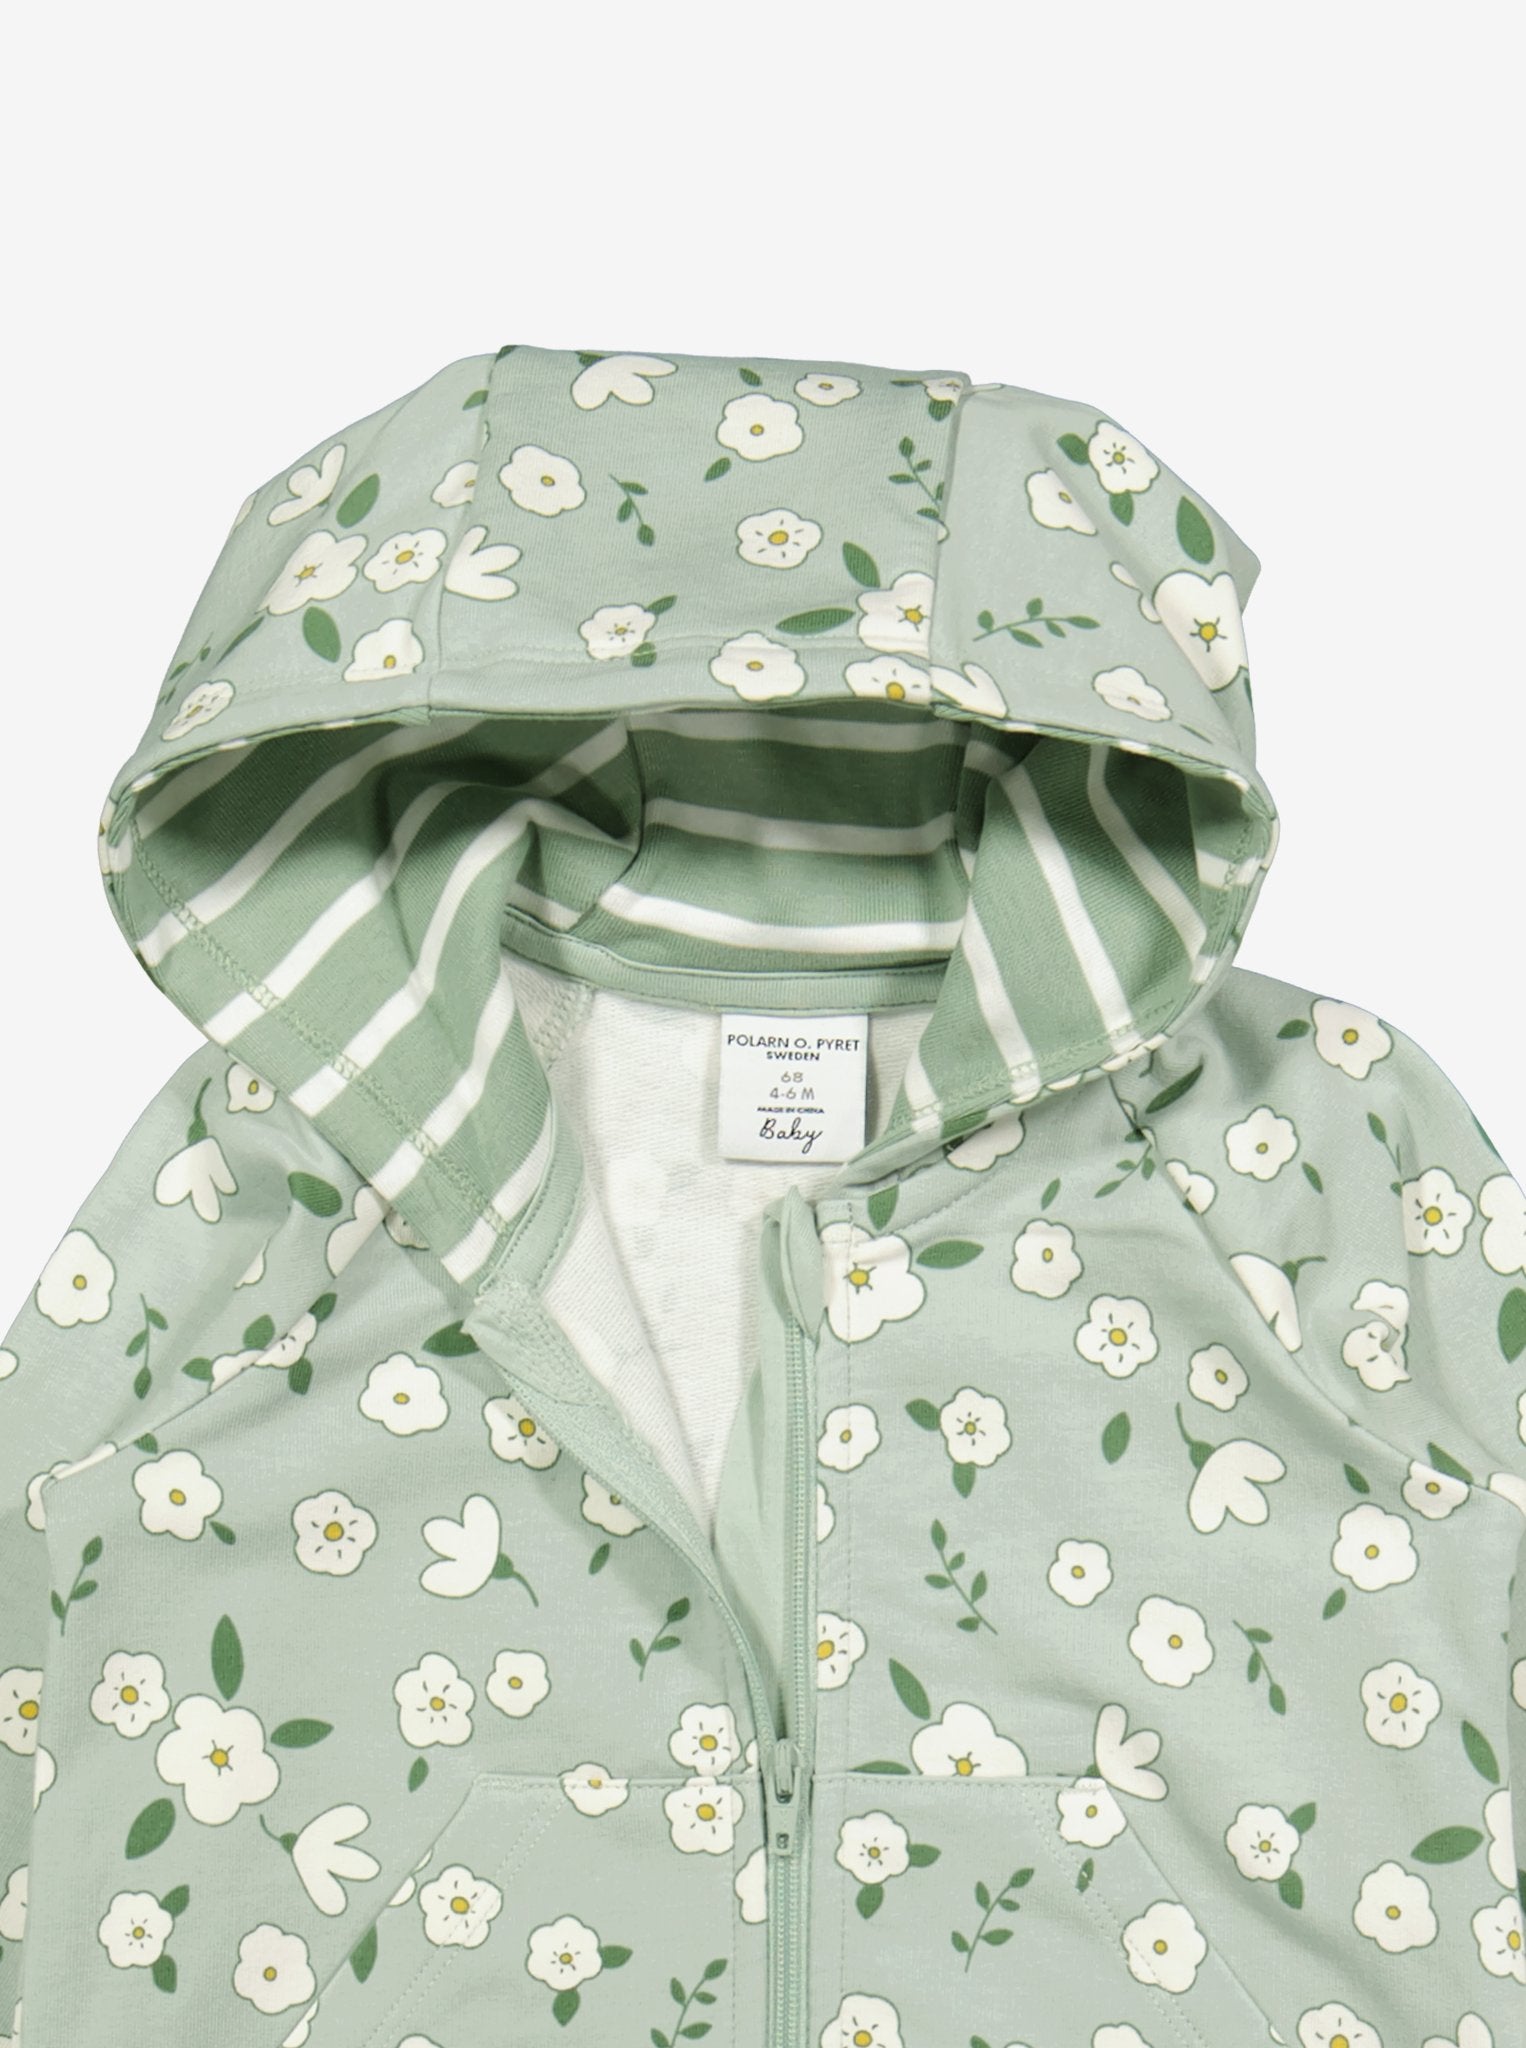  Organic Green Floral Baby All In One from Polarn O. Pyret Kidswear. Made from ethically sourced materials.